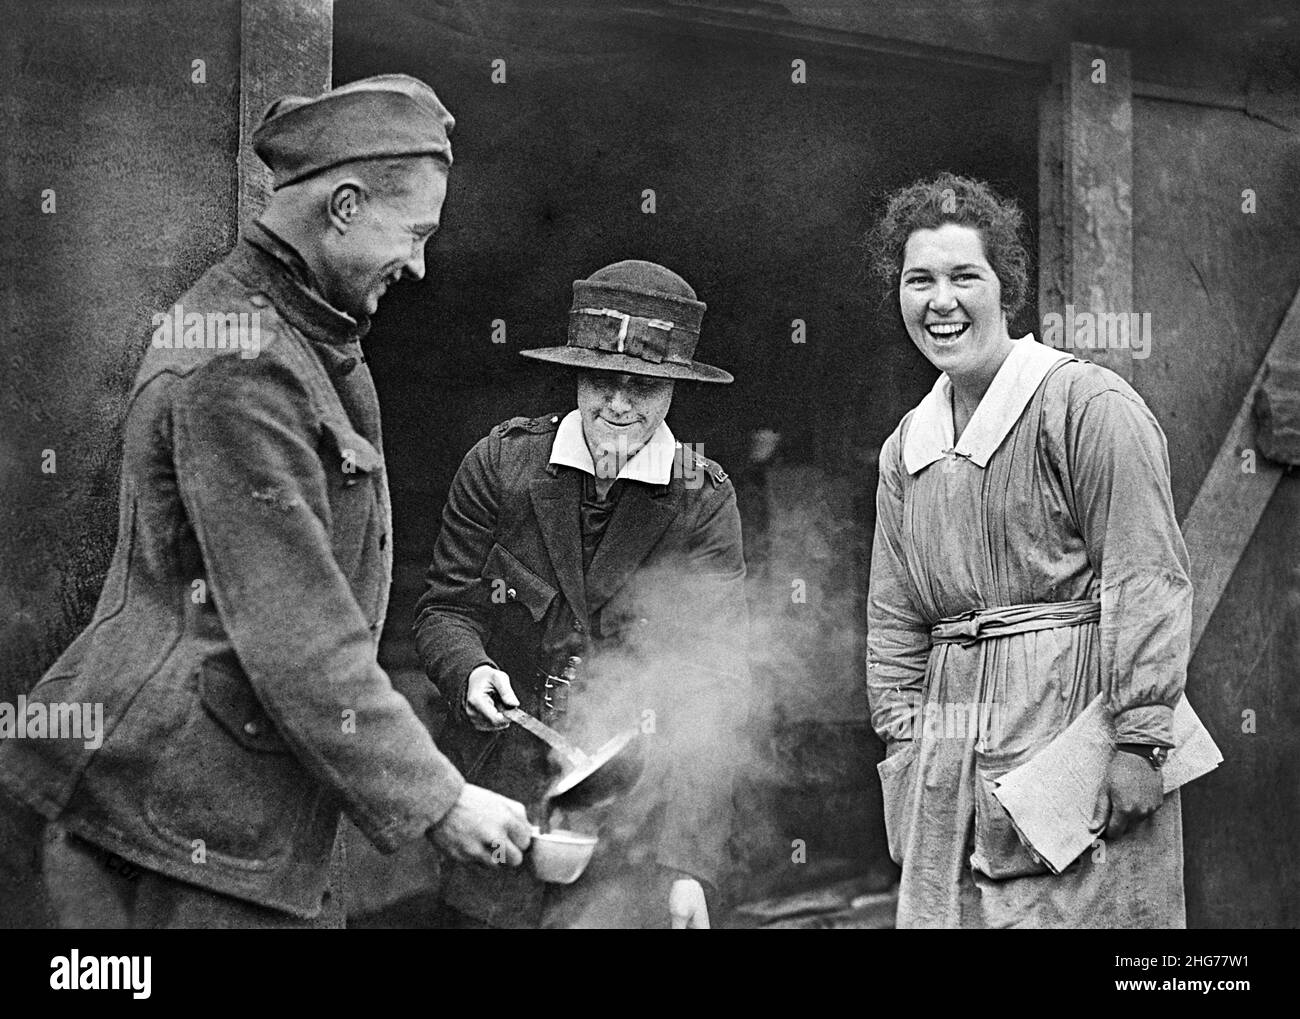 Miss Anna Rochester of Buffalo, New York, USA, serving chocolate to Pvt. Henry Schwenks, of the 326th Infantry, Co. A, 82nd Division, Canteen at American Red Cross Evacuation Hospital #6 & 7, Souilly, France, American National Red Cross Photograph Collection, March 12, 1919 Stock Photo